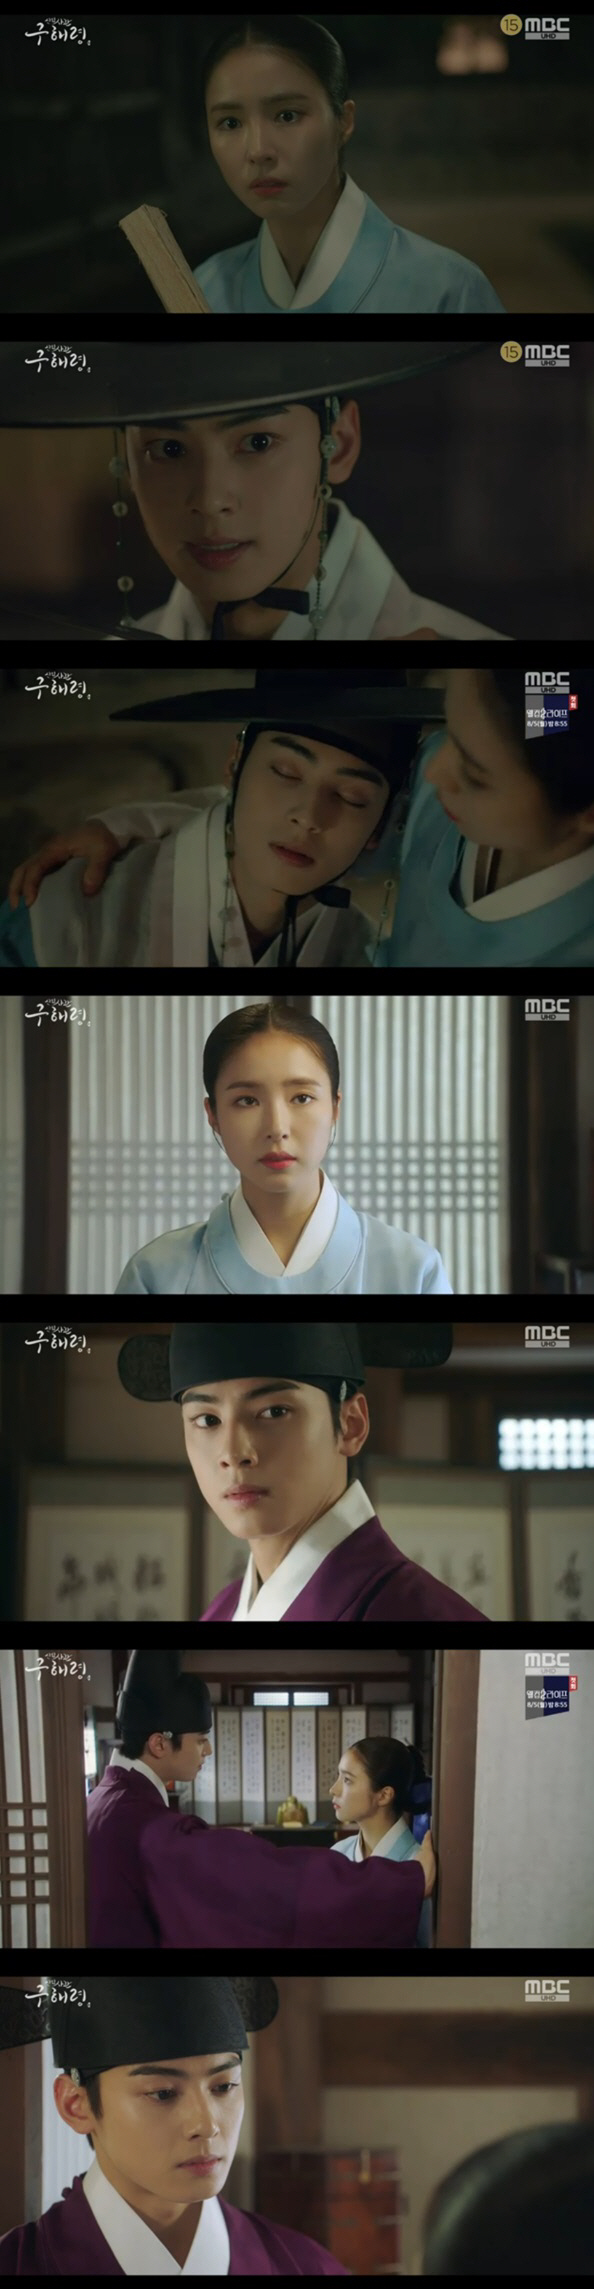 The new cadets, Na Hae-ryung, Shin Se-kyung and Jung Eun-woo, met with Ada Lovelace and Sejo of Joseon.In the MBC drama Na Hae-ryung, which was broadcast on the 31st, I learned that Na Hae-ryung (Shin Se-kyung), who started his full-scale military affairs, was actually a Sejo of Joseon.A murder occurred in the lungs, and one of them survived with a strange medicine.When Irim learned that the surviving person had spoken about the taboo, Hodam, he went to him with a deposit in the name of Hodam, which he wondered about, but he was already dead when Irim arrived.Since then, Irim, who was following Najang, who is presumed to be the perpetrator, was threatened with a knife by Najang.Asked who he was, he said, I am the prince of Joseon in this country, Sejo of Joseon.I can really hurt me. He replied with straight eyes, and Na Hae-ryung happened to see this by chance and learned the real identity of Irim.At this time, someone appeared and saved Lee Lim, and the surprised Lee Lim fell in the arms of Na Hae-ryung.Na Hae-ryung took care of the fallen Irim, and the soon-to-be Irim went straight to the crown prince Lee Jin (Park Ki-woong) to inform him of this.Irim said, I want to know who the hell the hodam is and what the hodam teacher is, but Lee Jin ordered, Do not tell me what the contents of the book are.The next day Na Hae-ryung was admitted to the Green Sea Hall, and Irim appeared in front of Na Hae-ryung wearing the doctor properly.Lee Lim continued to pay attention to Na Hae-ryung as he saw her record a book as Ada Lovelace.And Irim said, I have something to say to you. Finally, I stopped Na Hae-ryung from leaving the entrance examination.Na Hae-ryung asked, I have had a lot of opportunities in the meantime, but what do you want to say now? Irim said, I wanted to say thank you.I do not know why you were there last night, but I wanted to say thank you for not turning away from me, and I do not have to ask for forgiveness because I deceived you first. But Na Hae-ryung said: I thought maybe I could be a friend.I thought I could have one person who could be treated comfortably in this wide palace.  Why did not you tell me before? Na Hae-ryung and Ada Lovelace came the first paycheck, or the day they were given a green belt.Na Hae-ryung went to get a green bar with Ada Lovelace, but the Gwangheung Chang officials said, This month, the green bar payment is over. Come early next month.Since then, Na Hae-ryung and Ada Lovelace have found out that there is a corruption in relation to the payment of the green belt.Eventually Na Hae-ryung posted an appeal that corruption is prevalent in the payment of green belts.However, senior officers shouted, I only think about you, and Min Woo-won (Lee Ji-hoon) said, I want to talk.Nevertheless, Na Hae-ryung appealed with tears, saying, I just responded to what I had to do as a manager.Na Hae-ryung then found Leerim to go to the entrance examination, and Na Hae-ryung, who had a hard time with the problem of the green bar, eventually showed tears in front of Leerim.No one will hear it, so cry as much as you can. Lee Lim gave Na Hae-ryung a place to cry alone, and Na Hae-ryung cried out loud in the consideration of Lee Lim and confided in his heart.